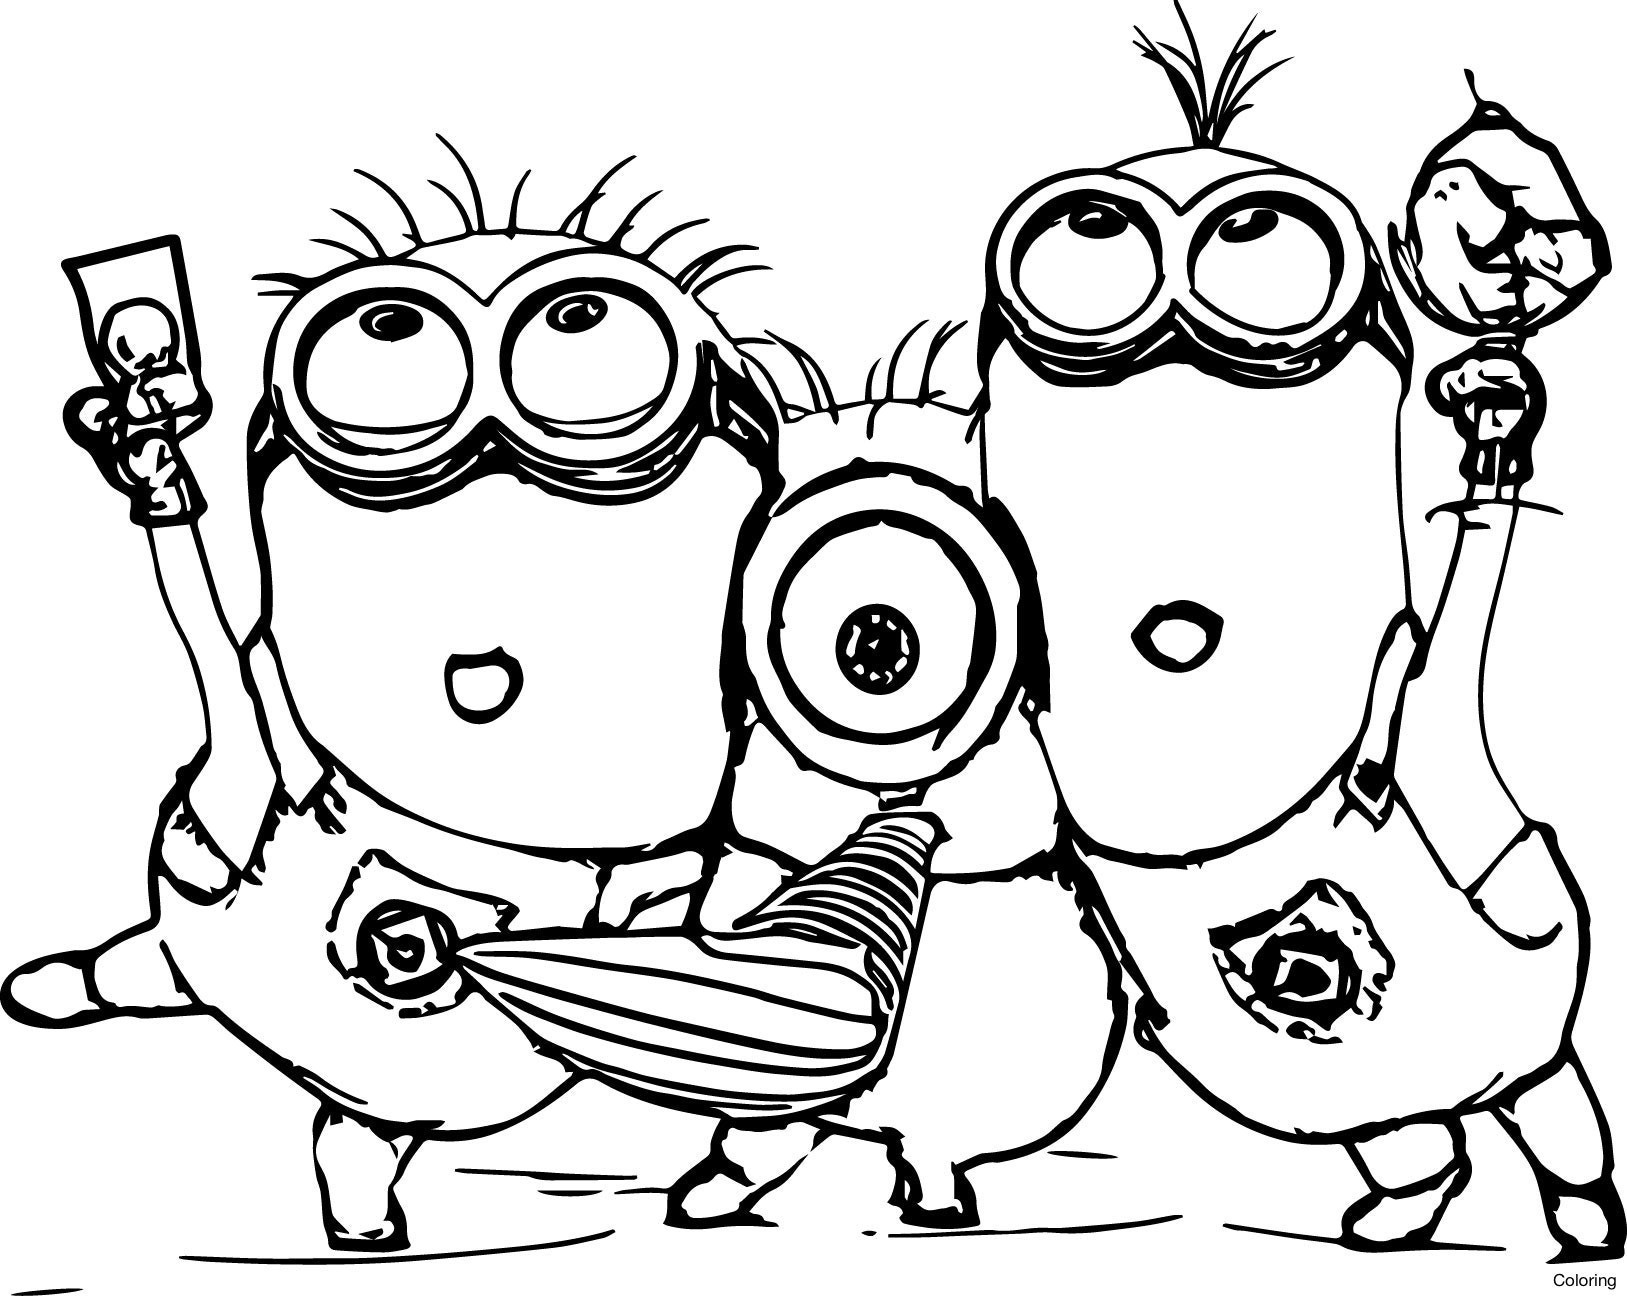 Coloring Pages For Kids Minion
 Minions coloring pages to print Coloring pages for kids